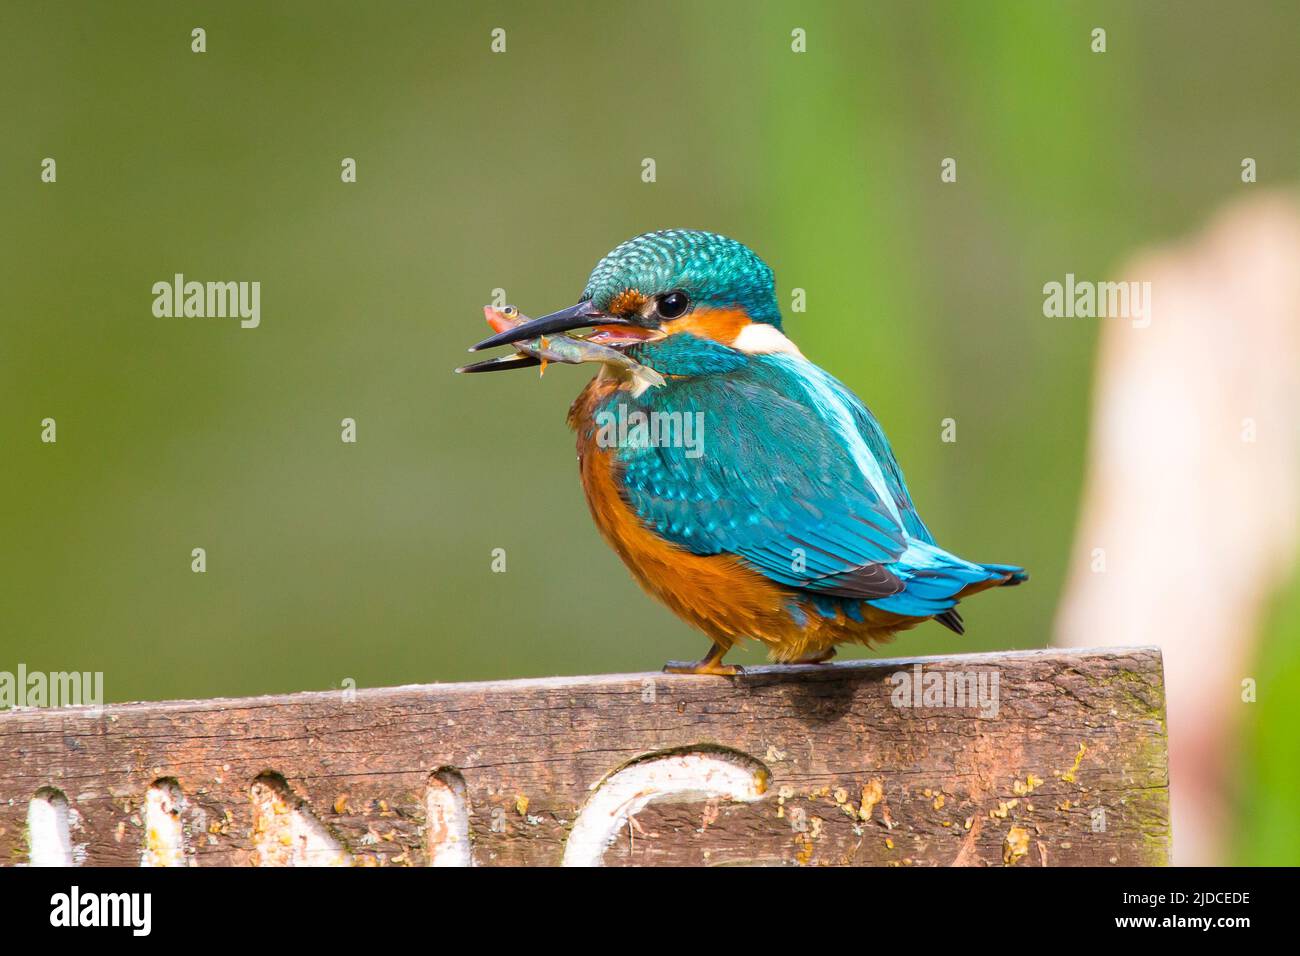 Kidderminster, UK. 20th June, 2022. UK weather: with bright sunny skies and warm temperatures, today is a pefect time for a little fishing. A brightly-coloured kingfisher bird captures a fish in its bill and is perched on a post ready to eat its meal. Credit: Lee Hudson/Alamy Live News Stock Photo